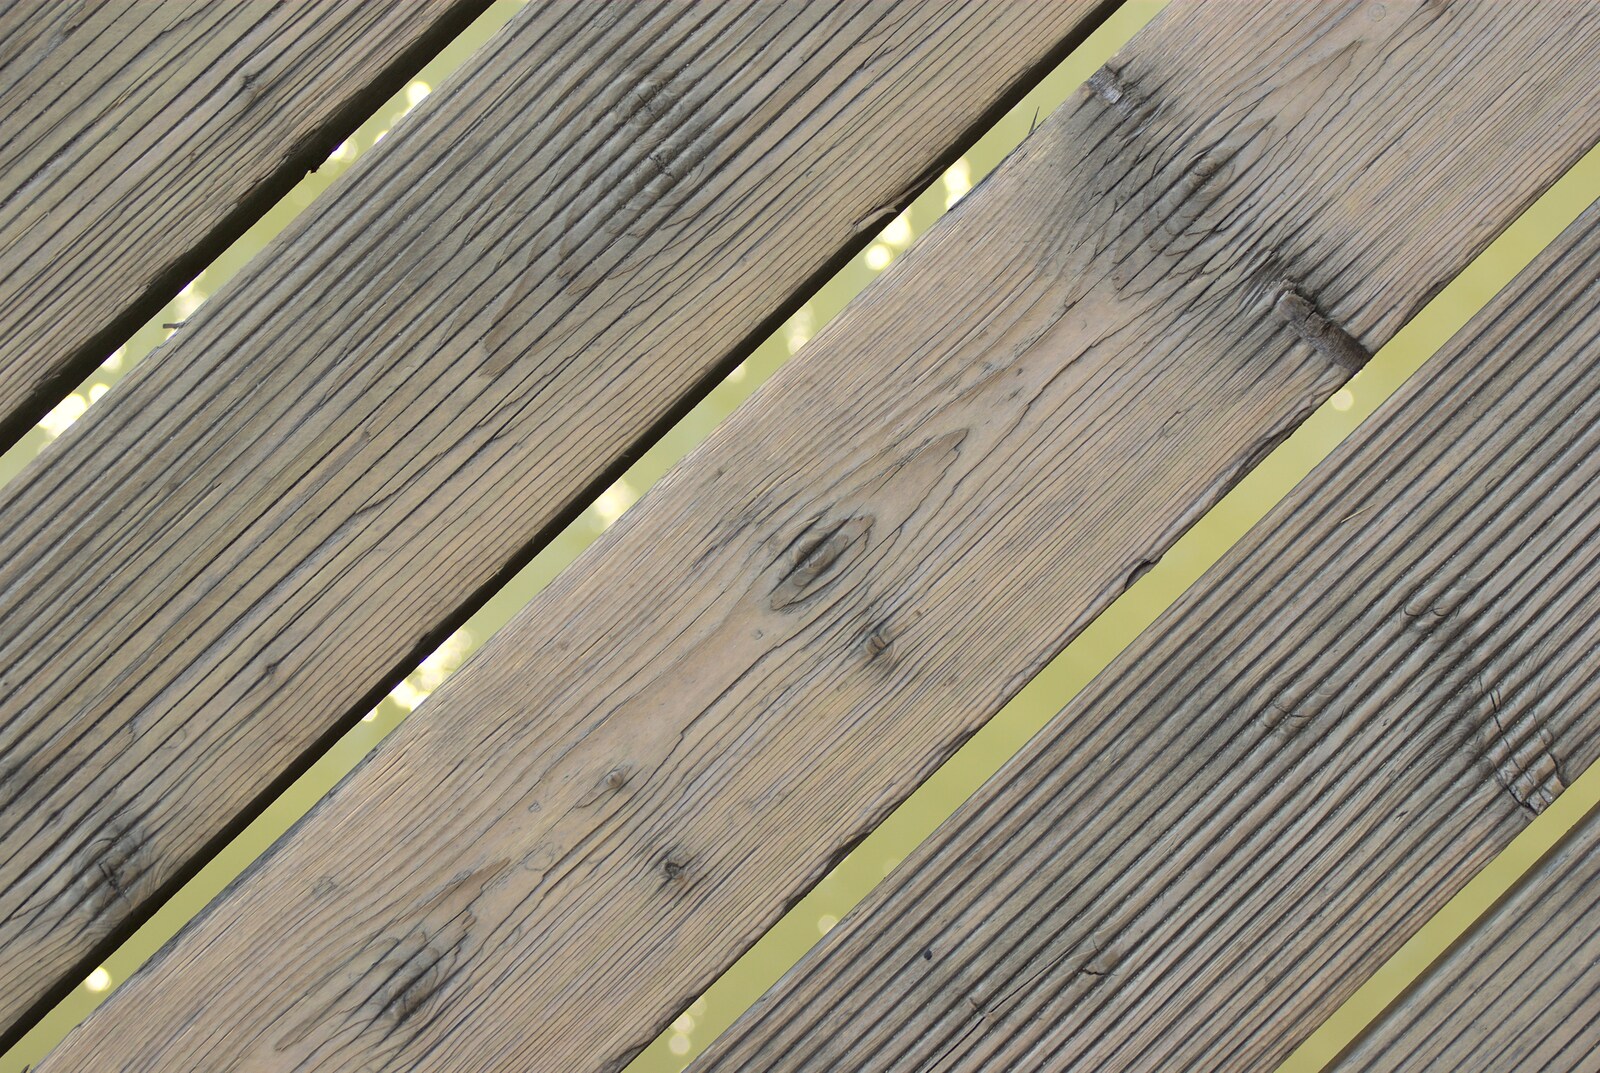 Weathered planks on the pier from The First Anniversary, Southwold, Suffolk - 3rd July 2011